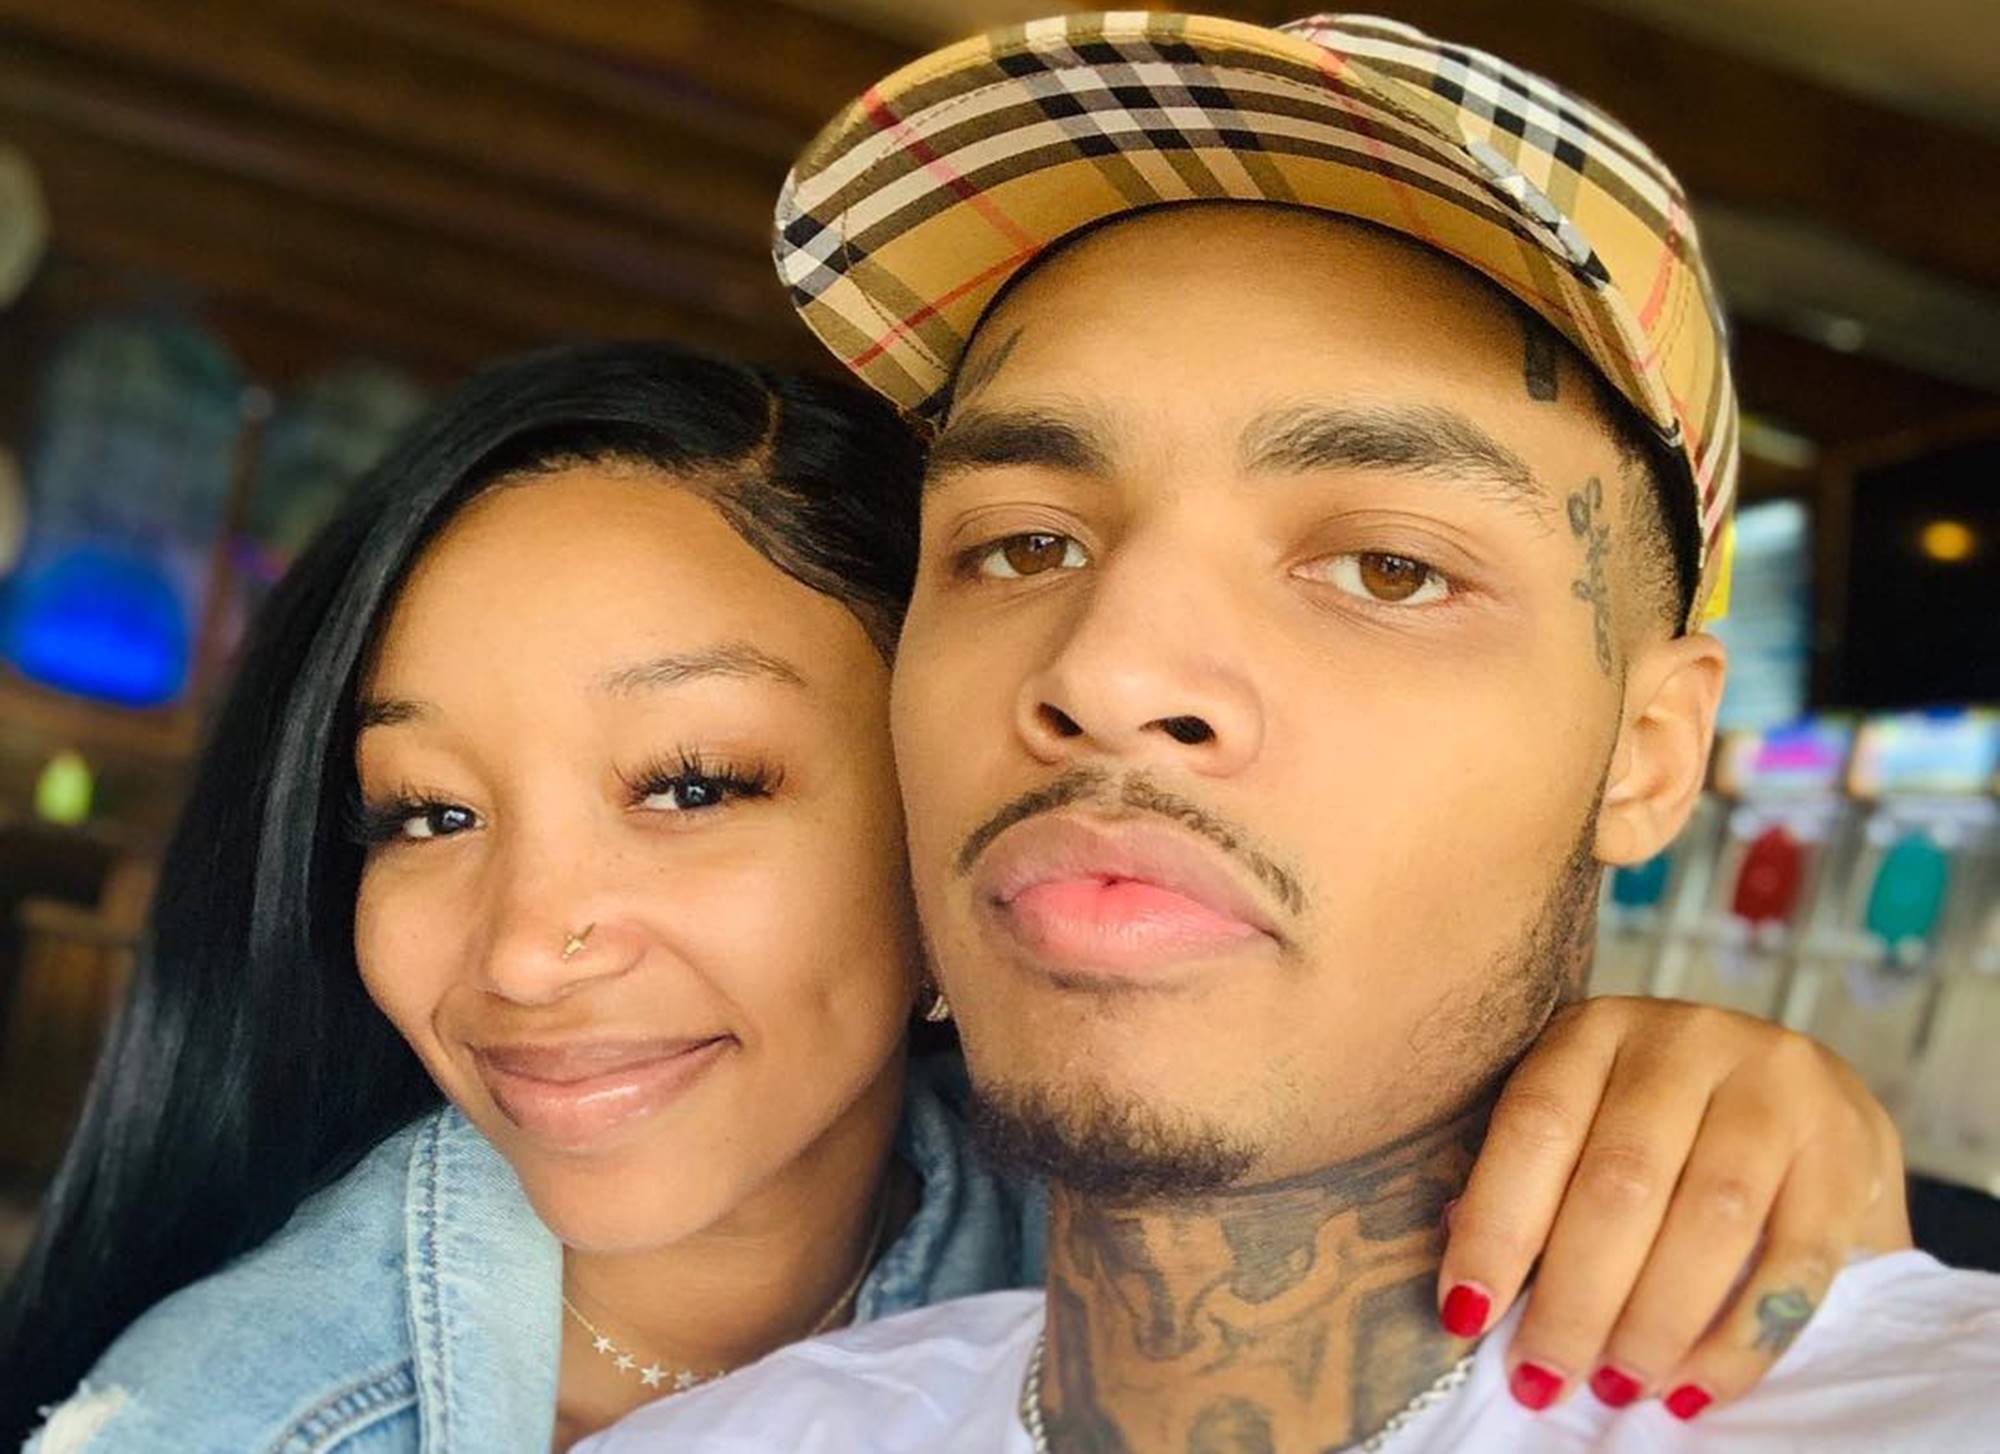 Zonnique Pullins Says She And Her BF Bandhunta Izzy Haven't Been High School Sweethearts, So They Made Their Own History - See The Pics And Find Out Why Some People Unfollowed Her